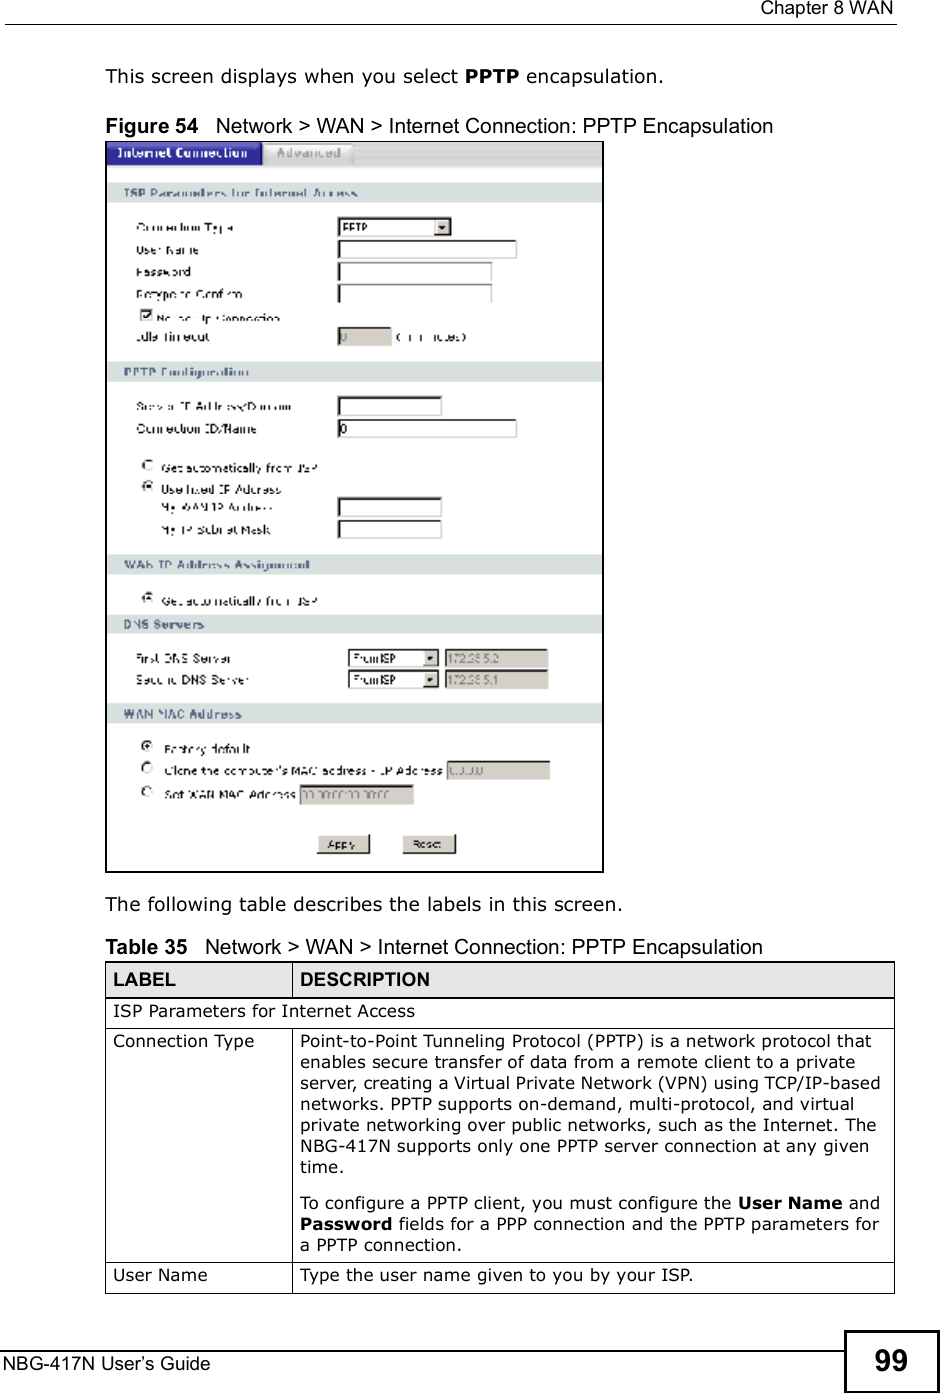  Chapter 8WANNBG-417N User s Guide 99This screen displays when you select PPTP encapsulation.Figure 54   Network &gt; WAN &gt; Internet Connection: PPTP EncapsulationThe following table describes the labels in this screen.Table 35   Network &gt; WAN &gt; Internet Connection: PPTP EncapsulationLABEL DESCRIPTIONISP Parameters for Internet AccessConnection Type Point-to-Point Tunneling Protocol (PPTP) is a network protocol that enables secure transfer of data from a remote client to a private server, creating a Virtual Private Network (VPN) using TCP/IP-based networks. PPTP supports on-demand, multi-protocol, and virtual private networking over public networks, such as the Internet. The NBG-417N supports only one PPTP server connection at any given time. To configure a PPTP client, you must configure the User Name and Password fields for a PPP connection and the PPTP parameters for a PPTP connection.User Name Type the user name given to you by your ISP. 